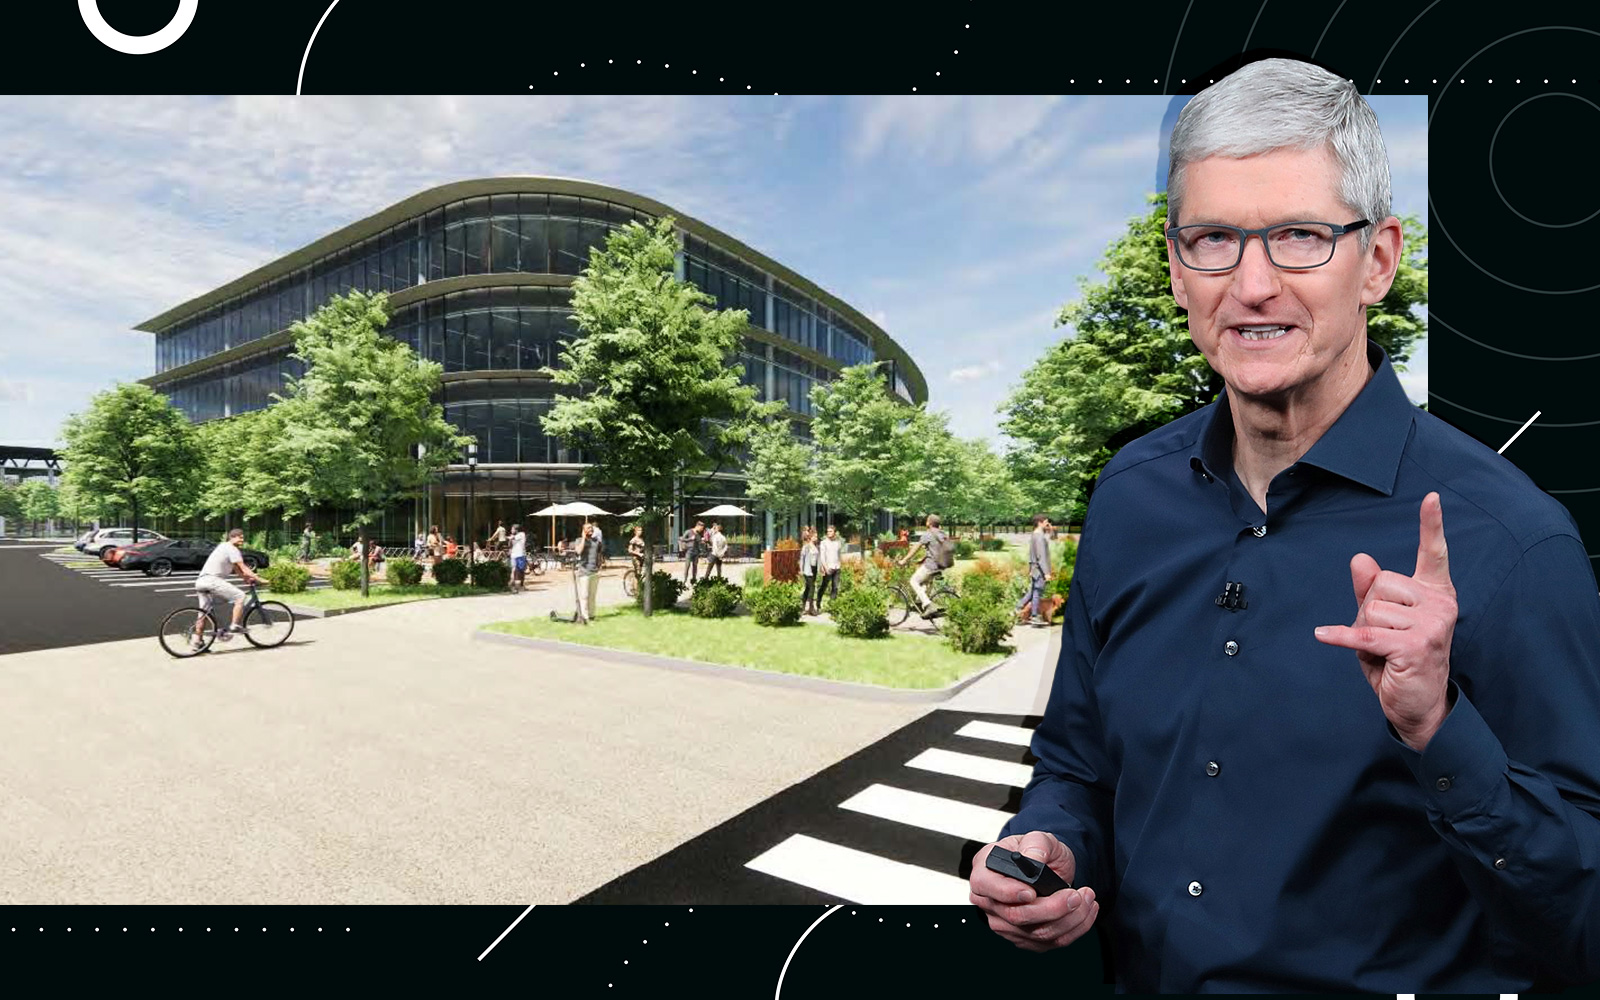 Apple's Tim Cook and Renderings of plans for 19191 Vallco PKWY in Cupertino